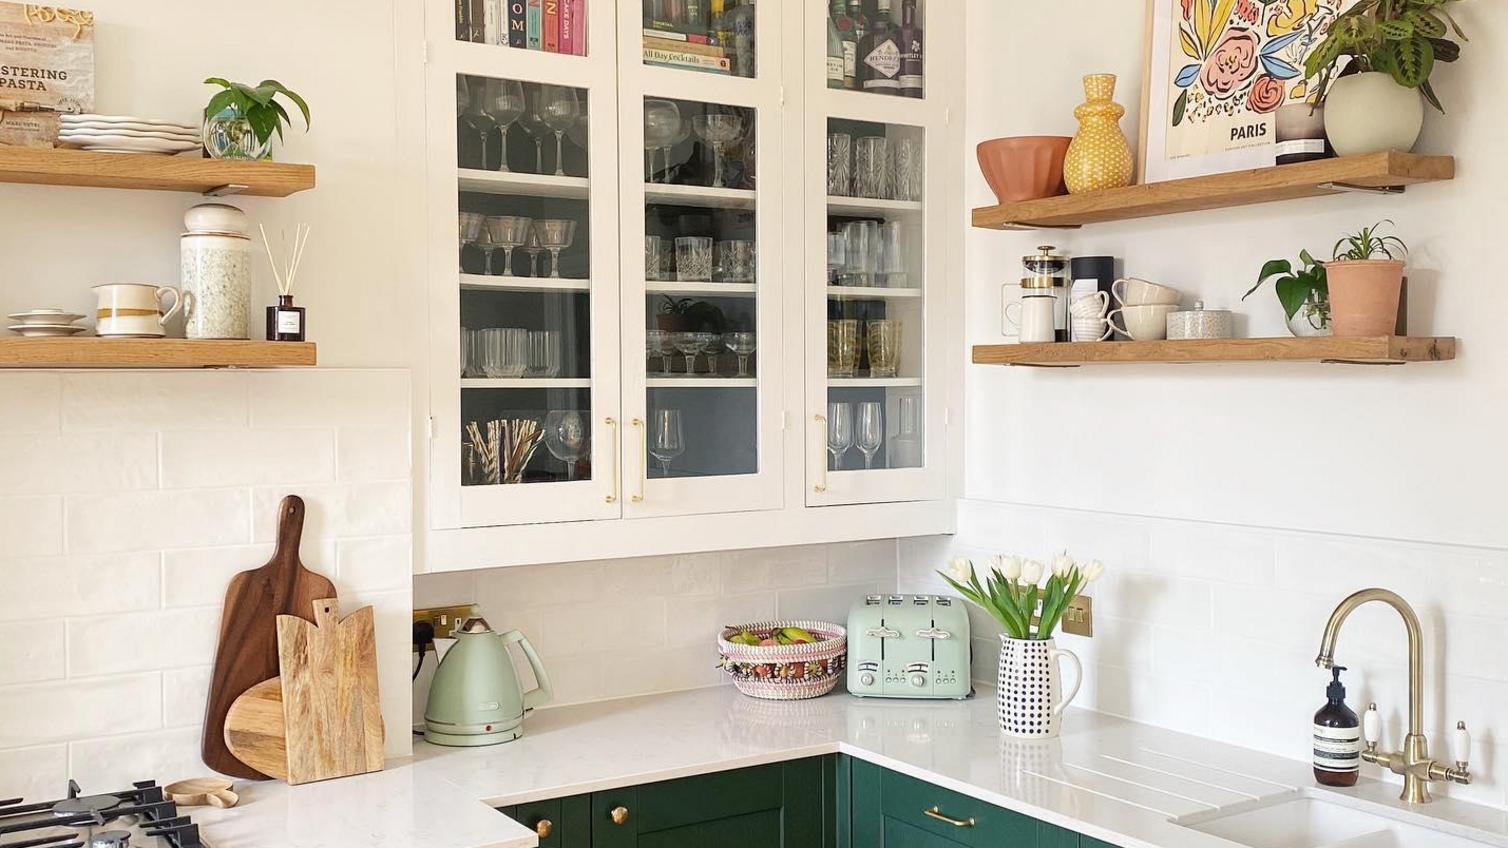 Kitchen storage idea using shelves and glass doors for wall-mounted storage for cups and books.